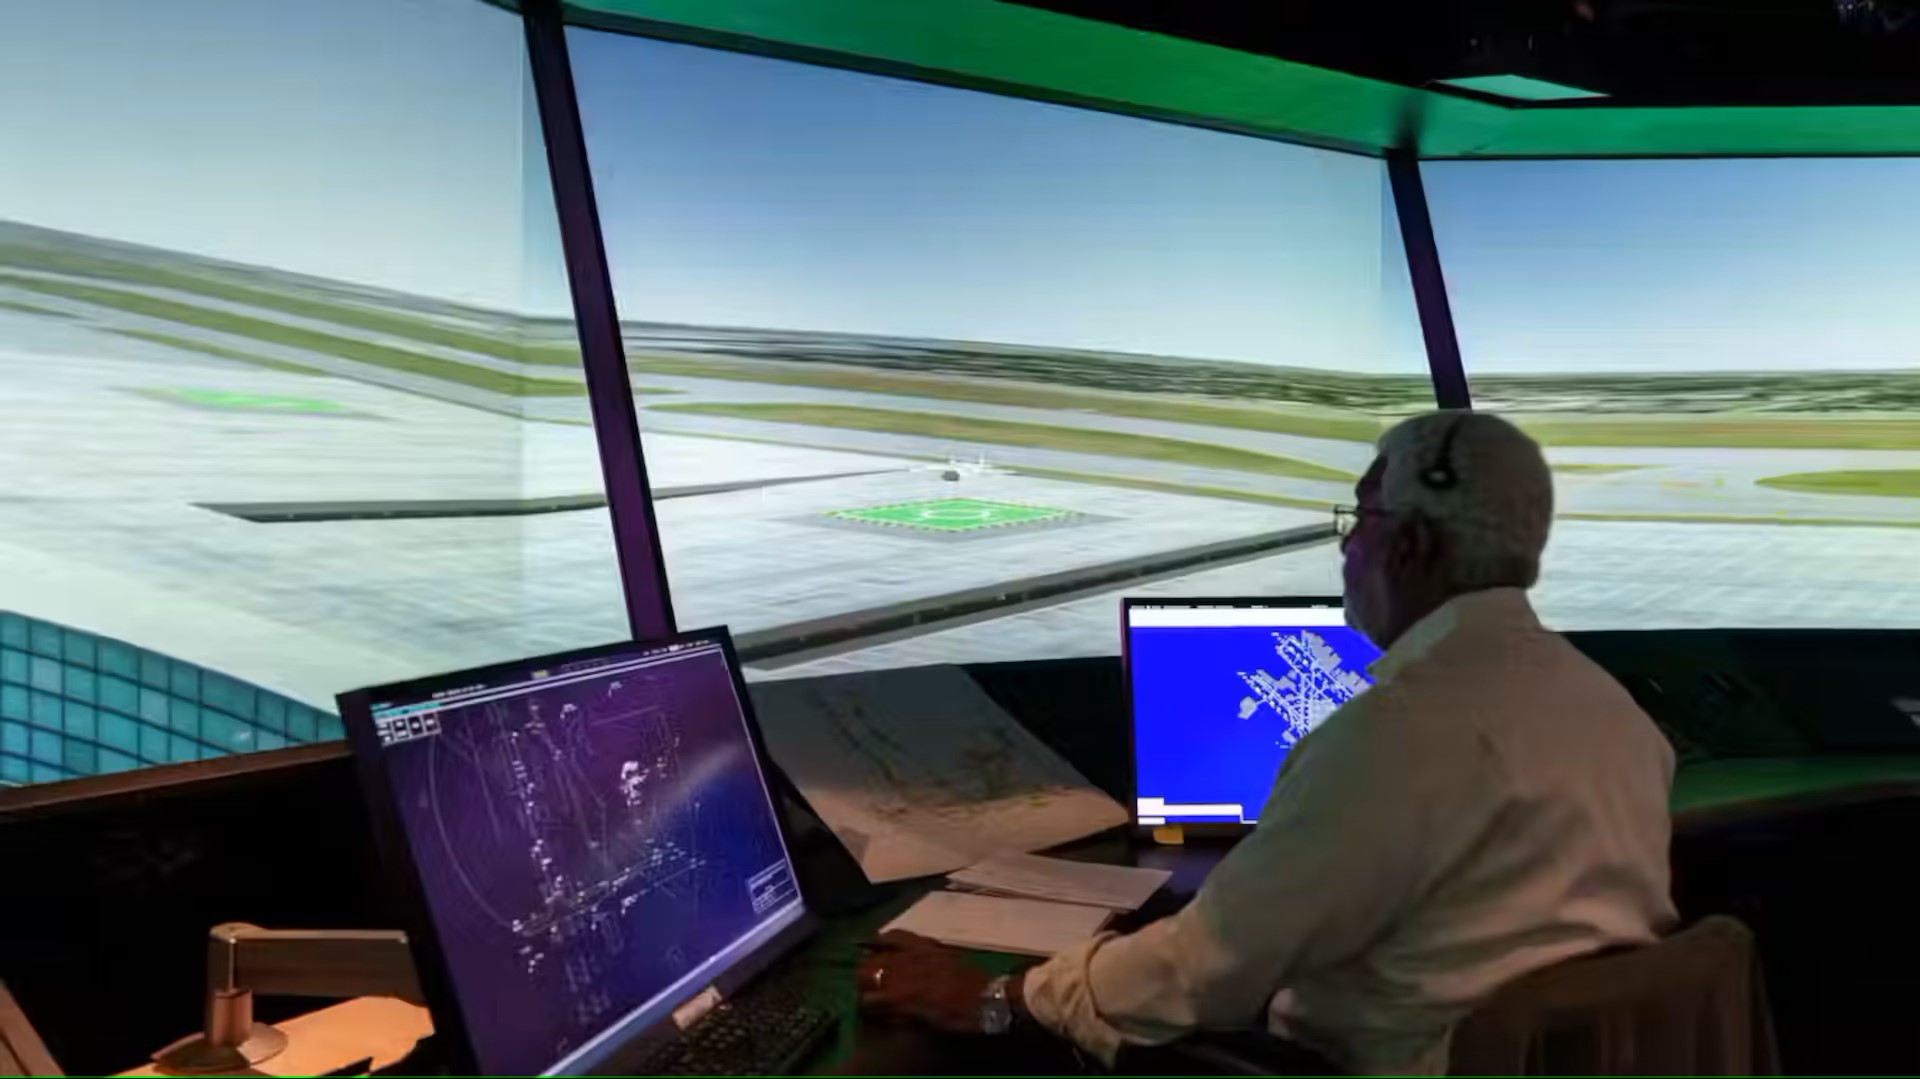 NASA, Joby Research Provide Glimpse of Air Taxi Operations at US Airports